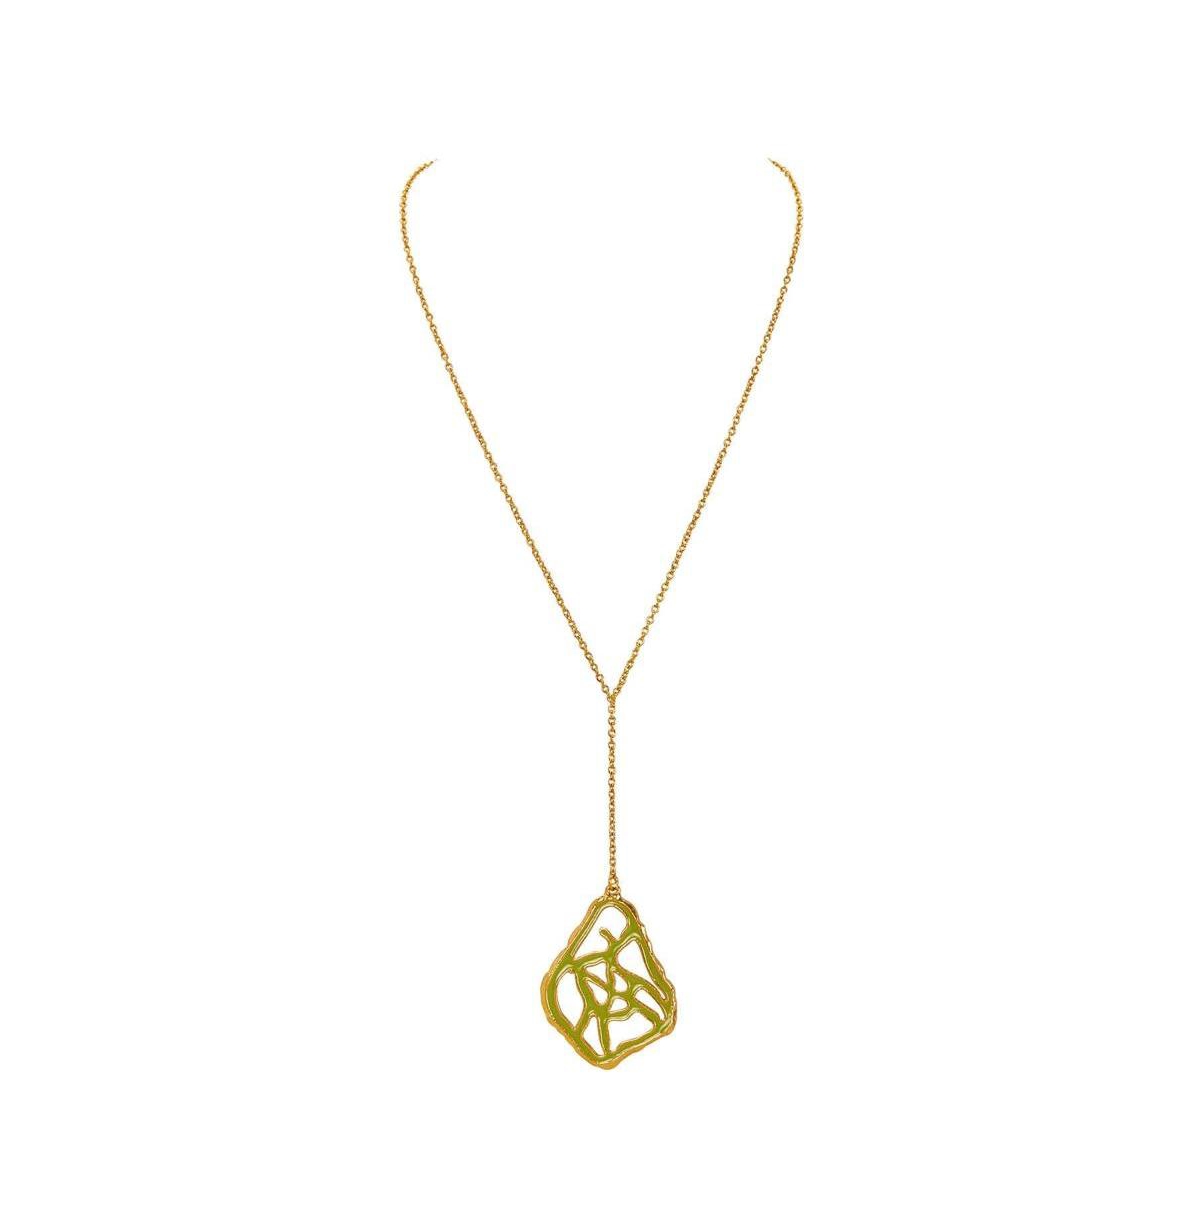 Tala Necklace - Gold